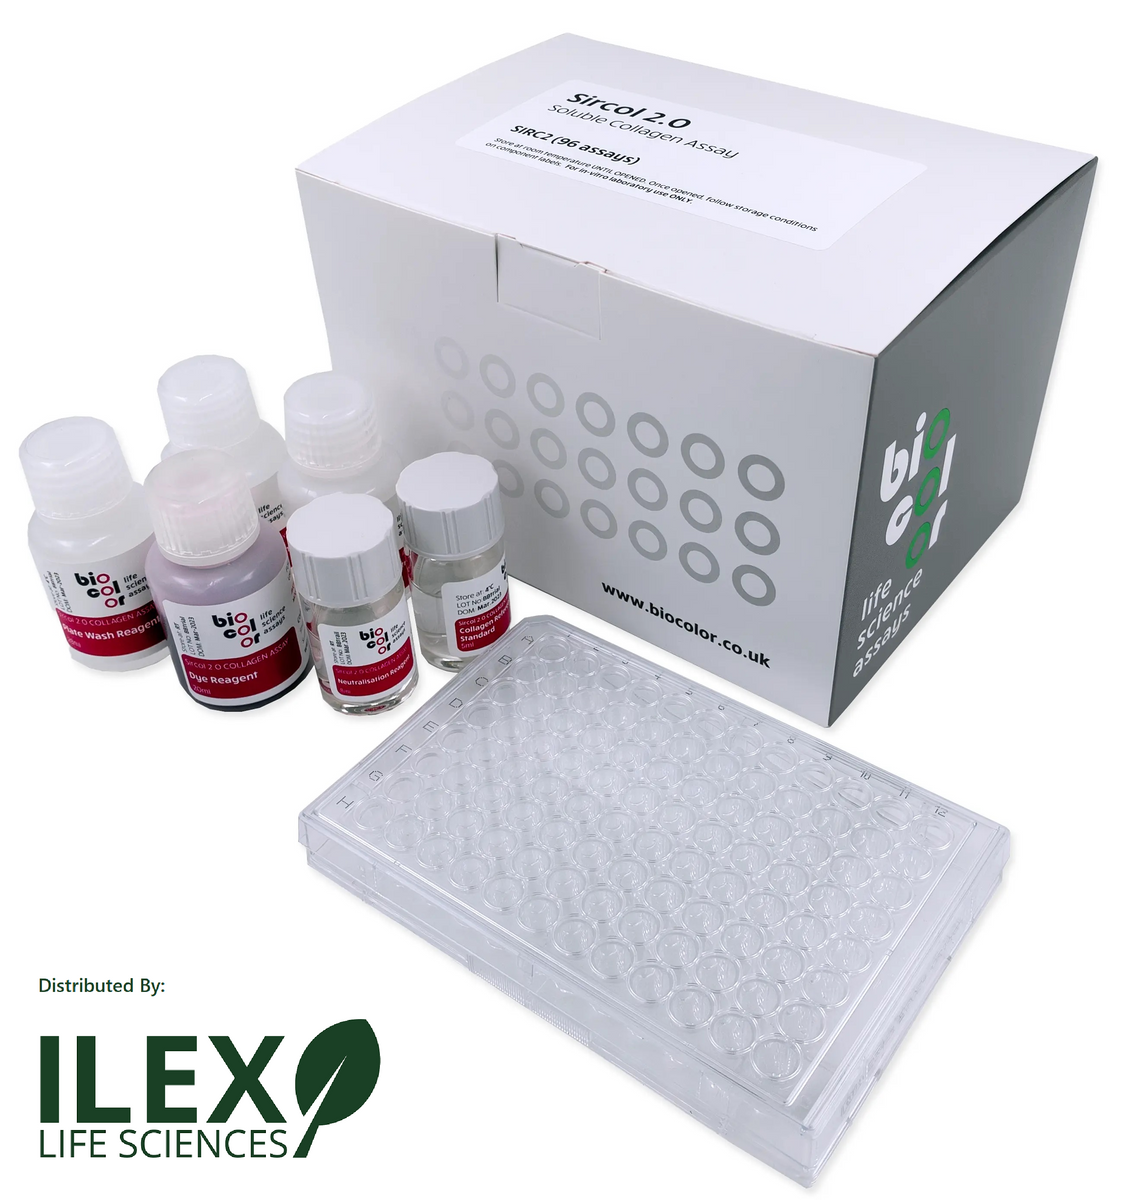 Picture of the new Biocolor Sircol 2.0 Soluble Collagen Assay Kit, Catalog No. SIRC2, manufactured by Biocolor and distributed by Ilex Life Sciences LLC.